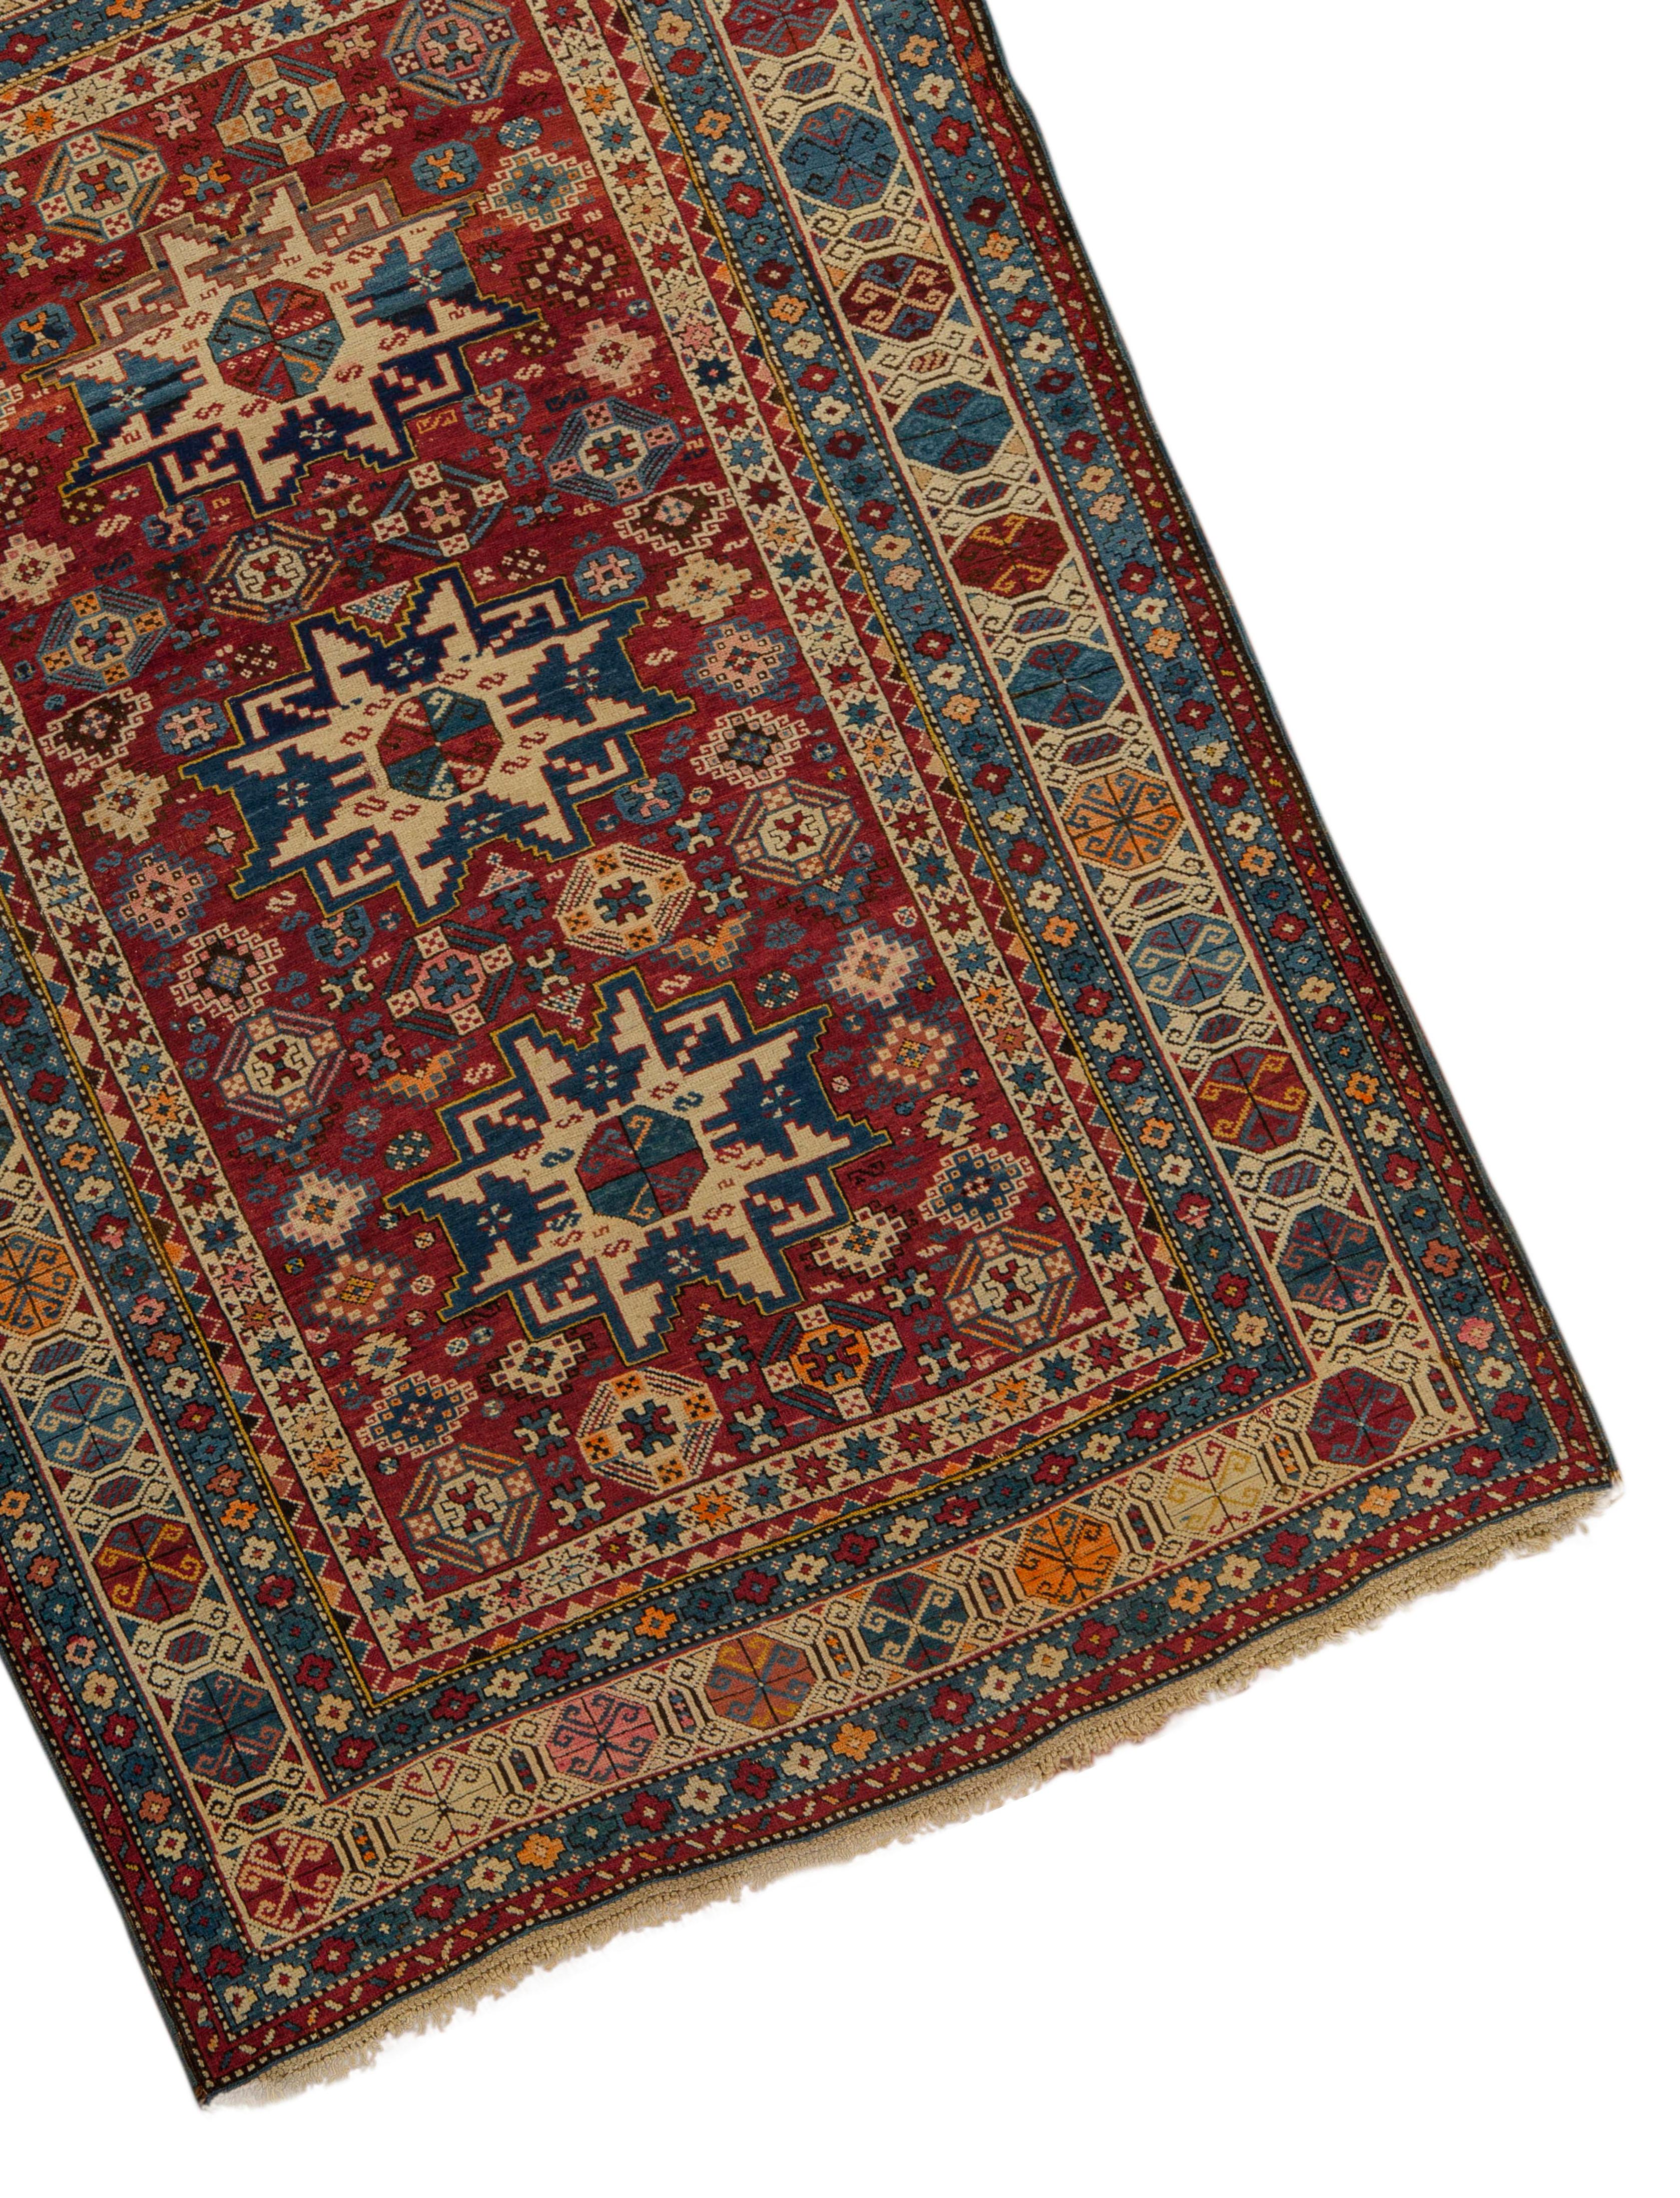 Antique Caucasian Lesghi Star rug, circa 1880, the central field with three Lesghi star motifs surrounded by ethnic symbols and designs completed by multiple borders that set the frame for the central design in a very picturesque way. Size: 3'10 x